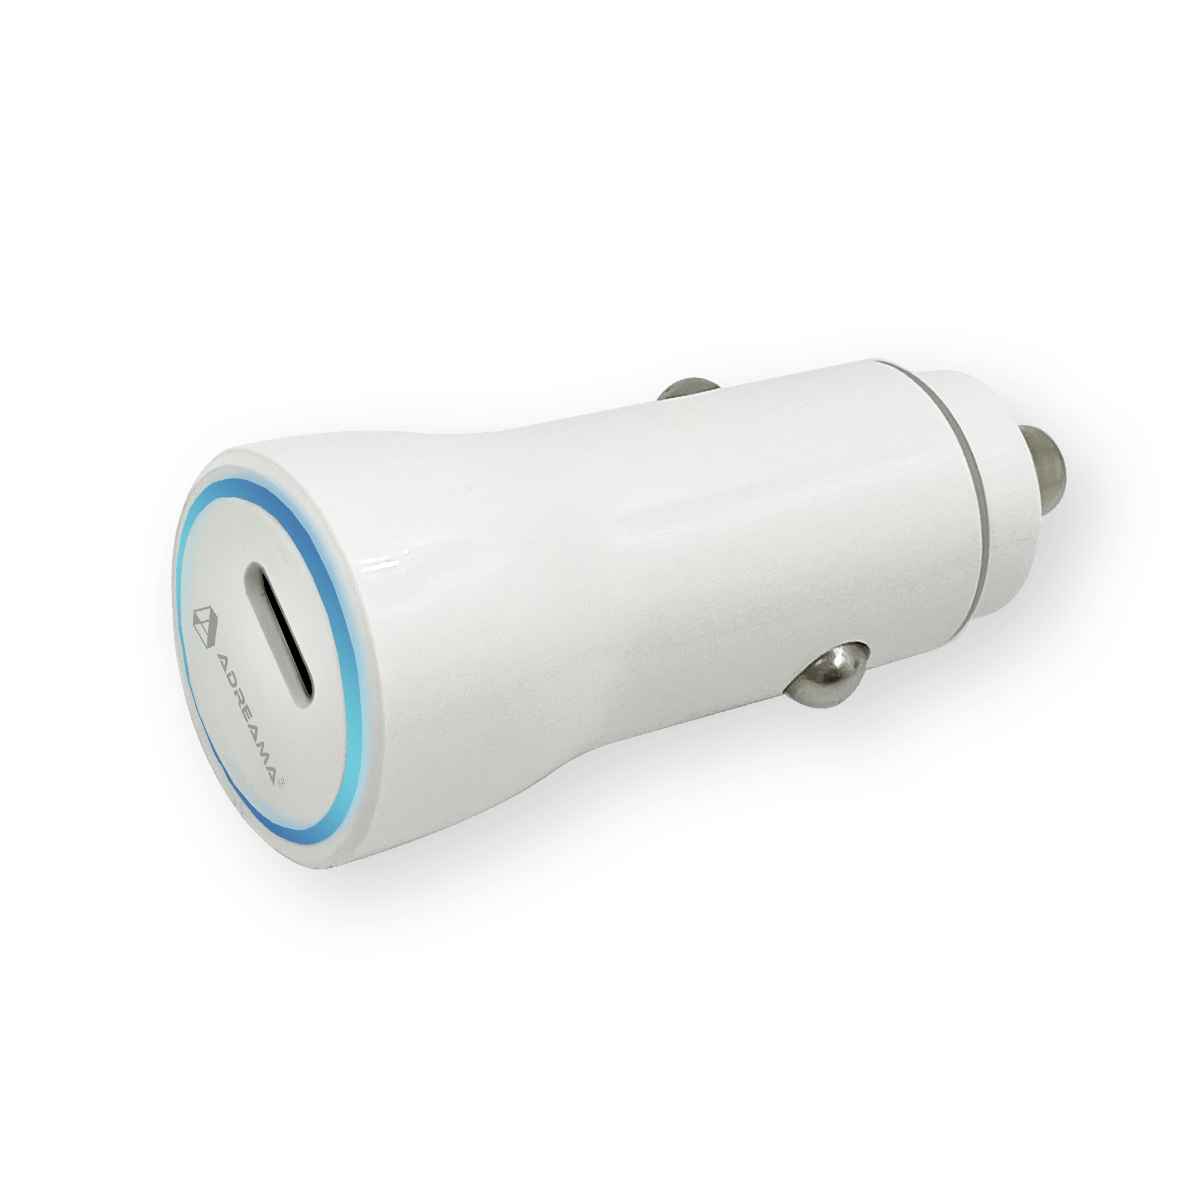 Top 5 Reasons Why You Need the Adreama PD 20W Fast Car Charger with USB-C Port - White